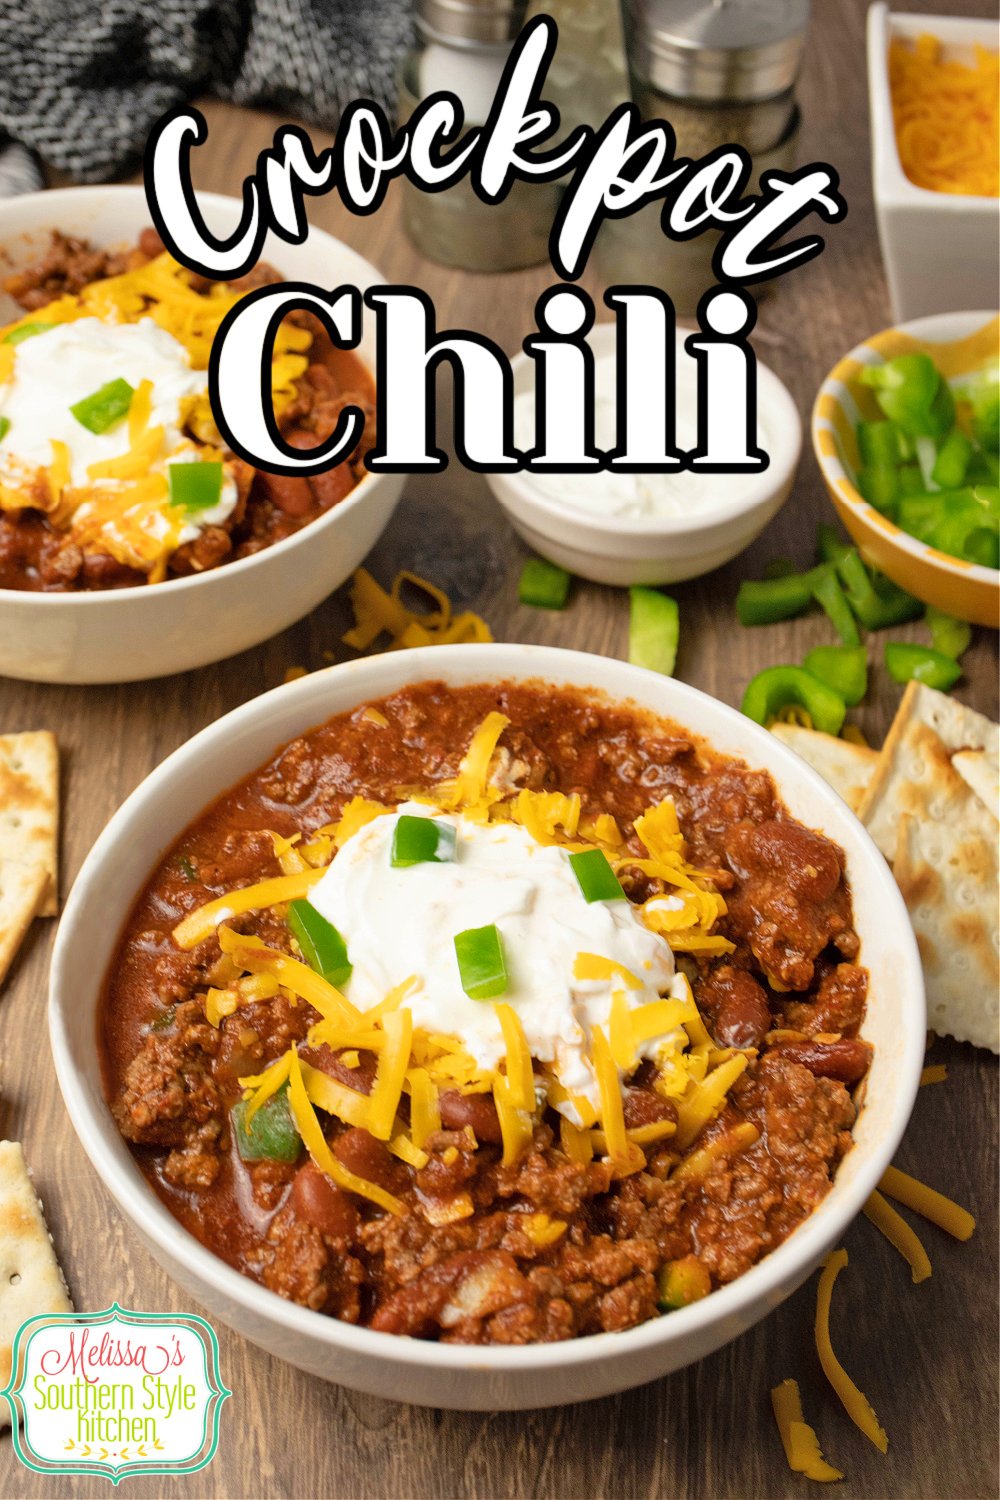 You can feast on a big bowl of this Crockpot Chili Recipe any night of the week or simmer it low and slow for game day grazing. #chili #chilirecipes #crockpotchili #slowcookerchili #easygroundbeefrecipes #beefchili #chiliwithbeans via @melissasssk